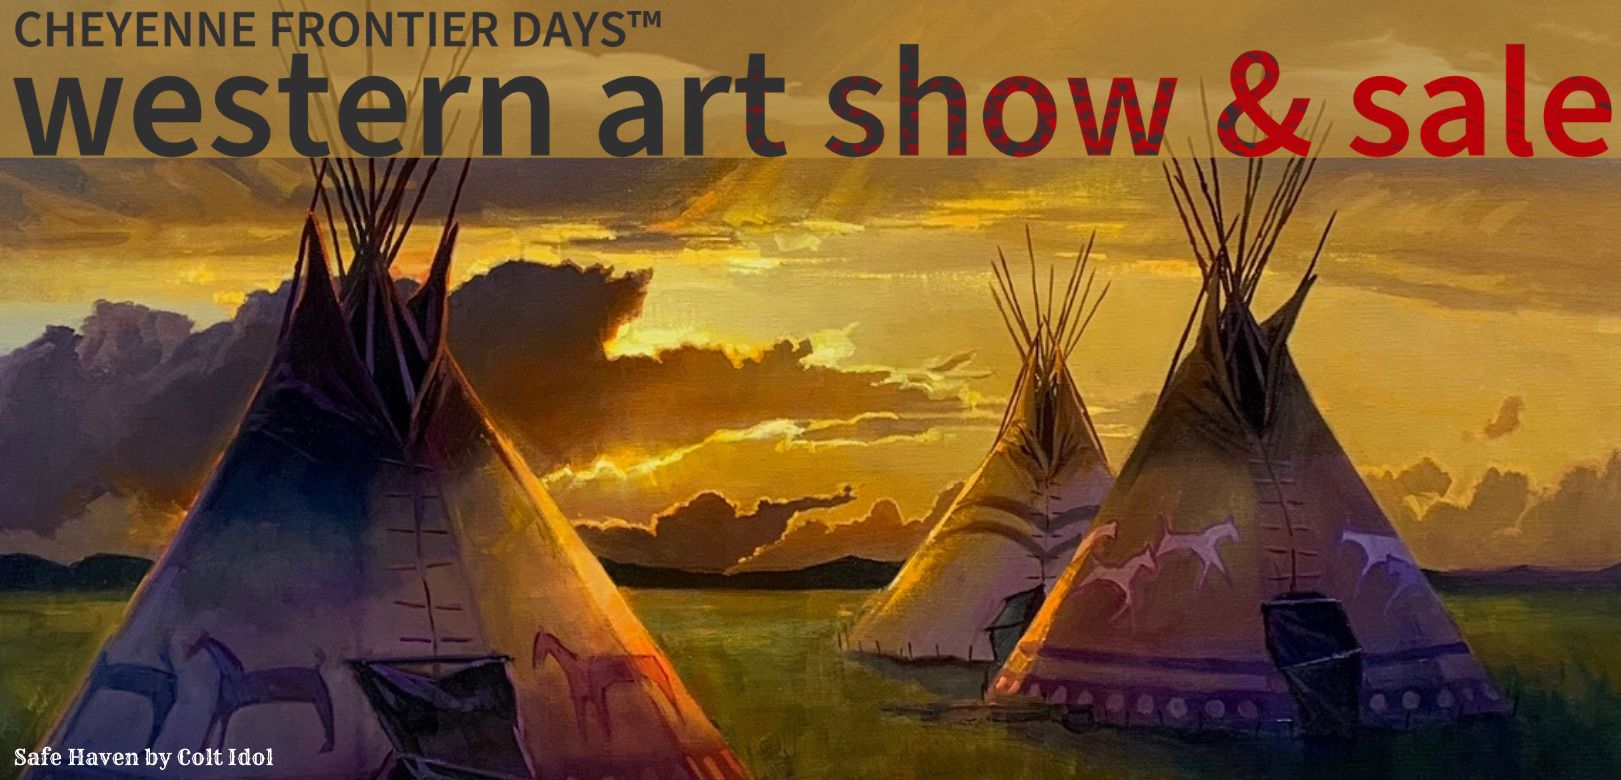 Virtual Reception To Kick Off 40th Annual CFD Western Art Show And Sale